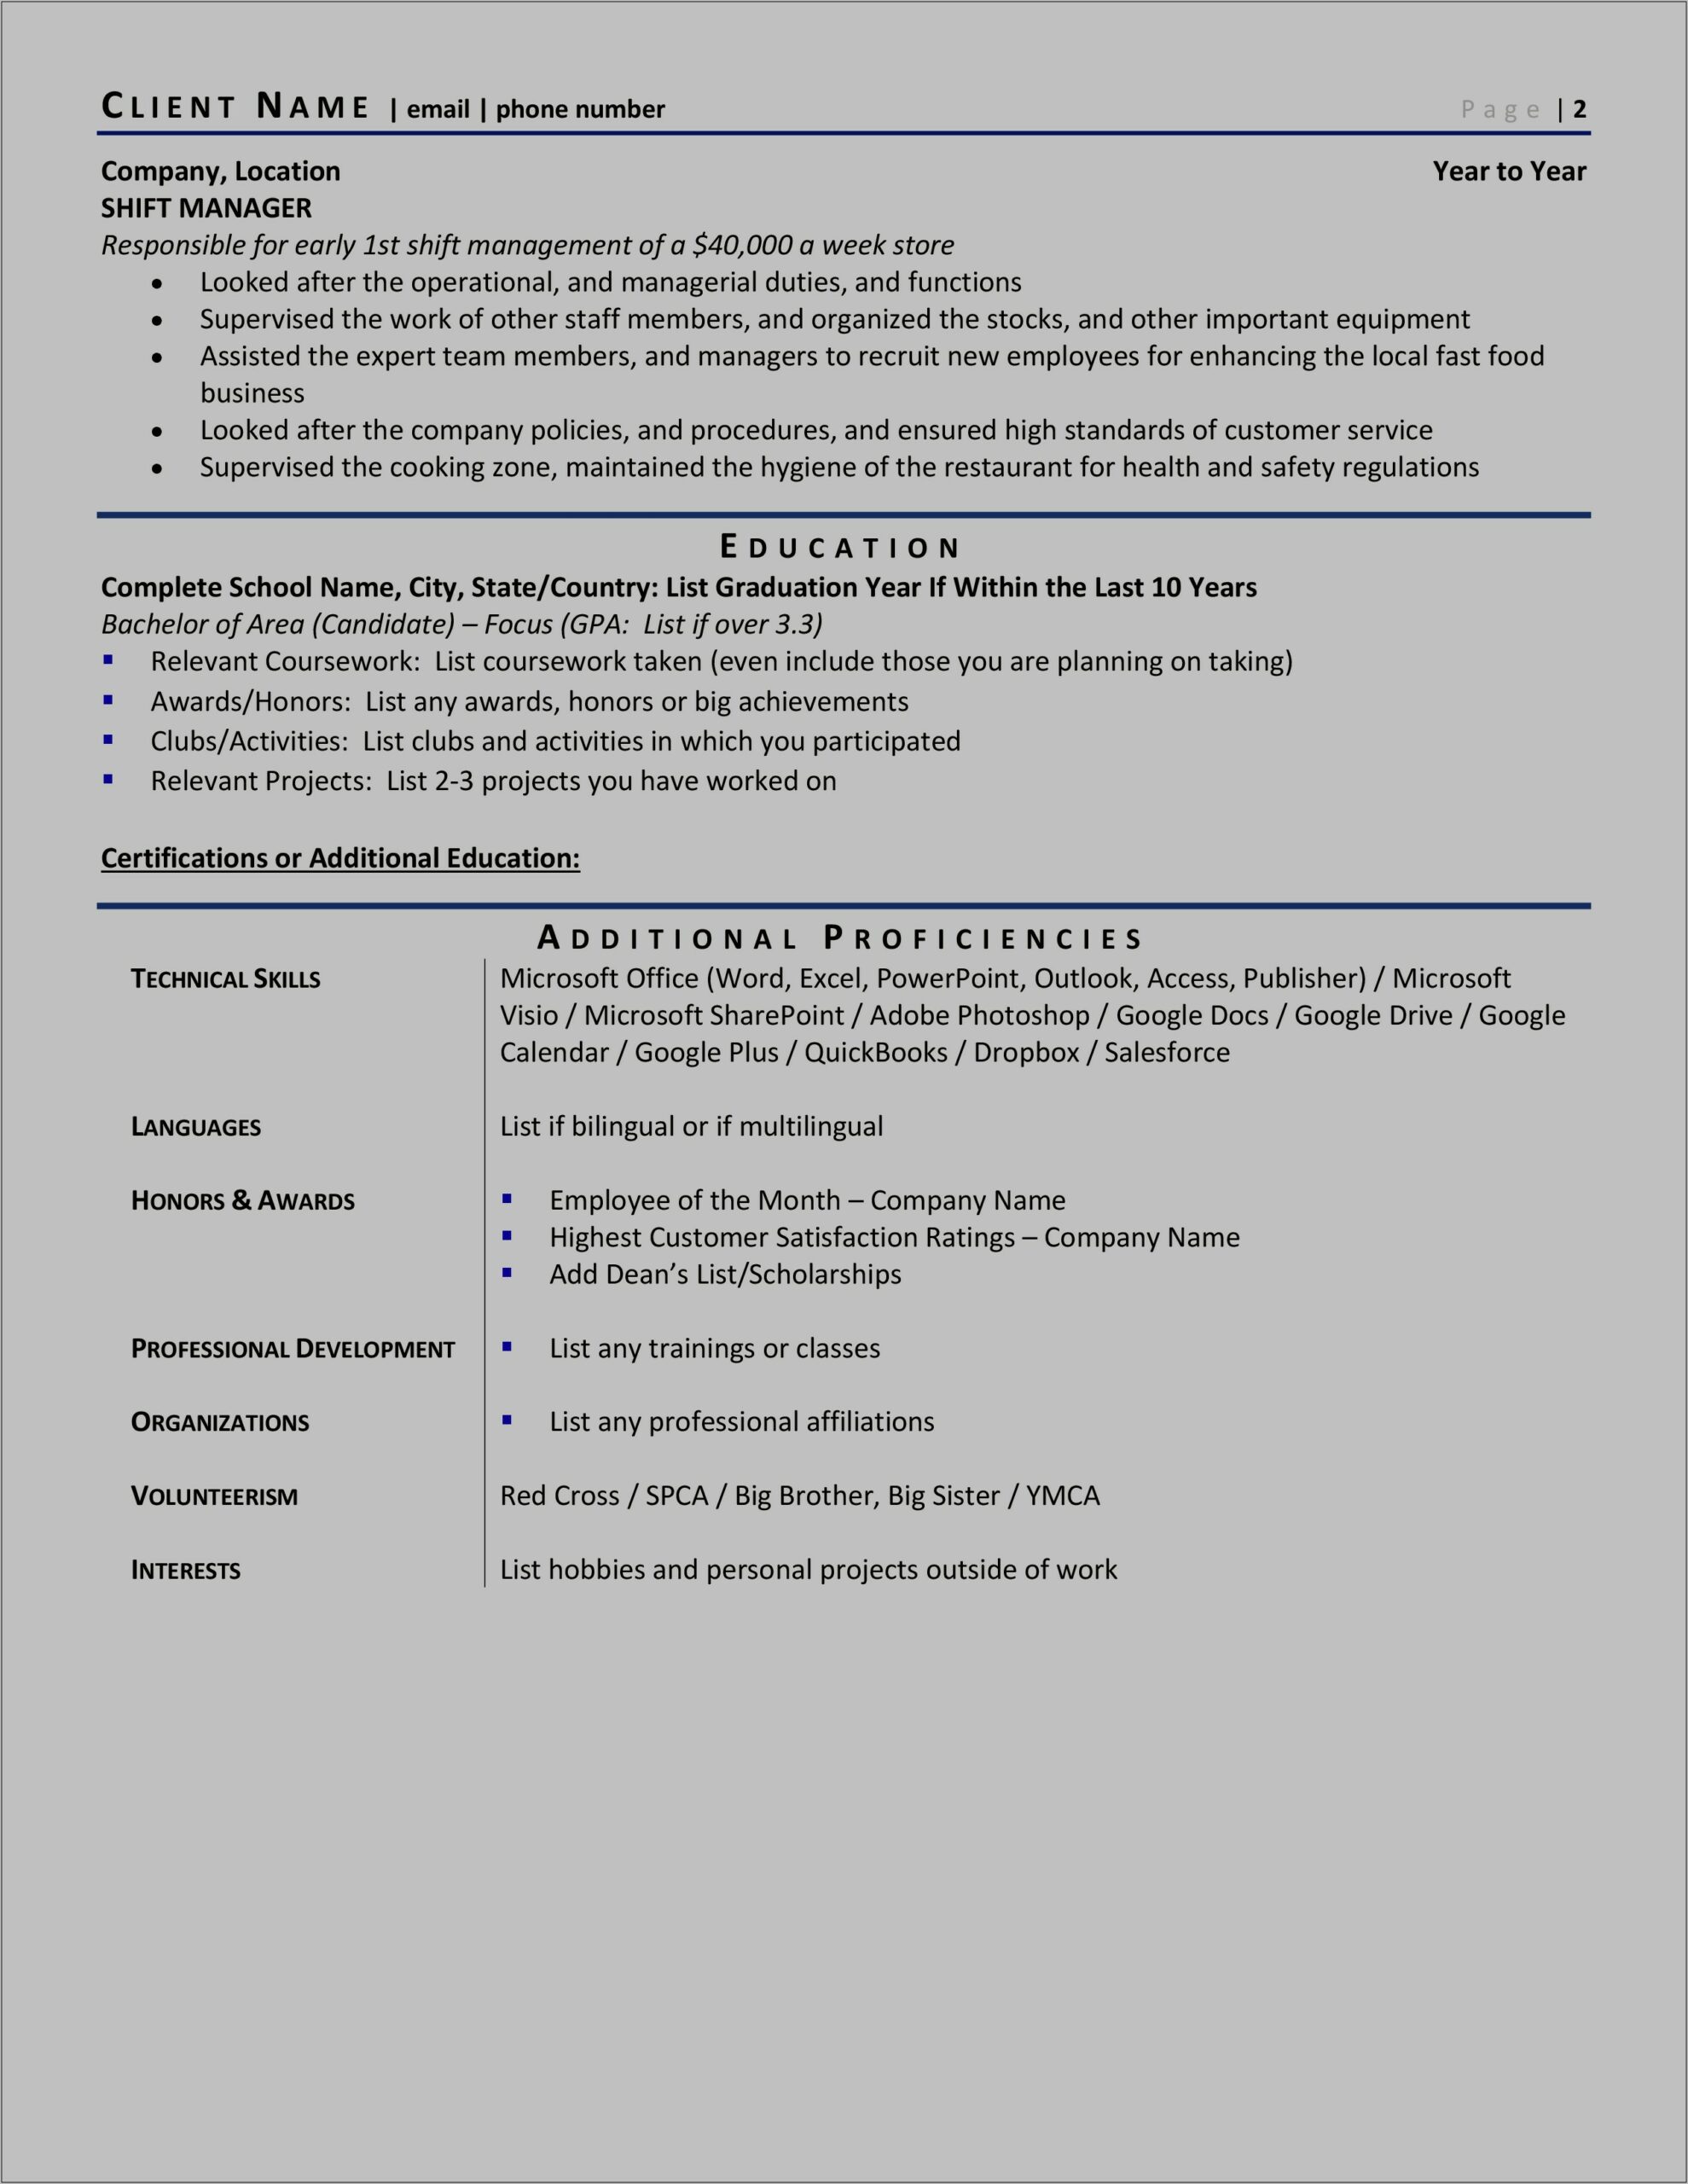 Resume To Show Experience In All Business Areas